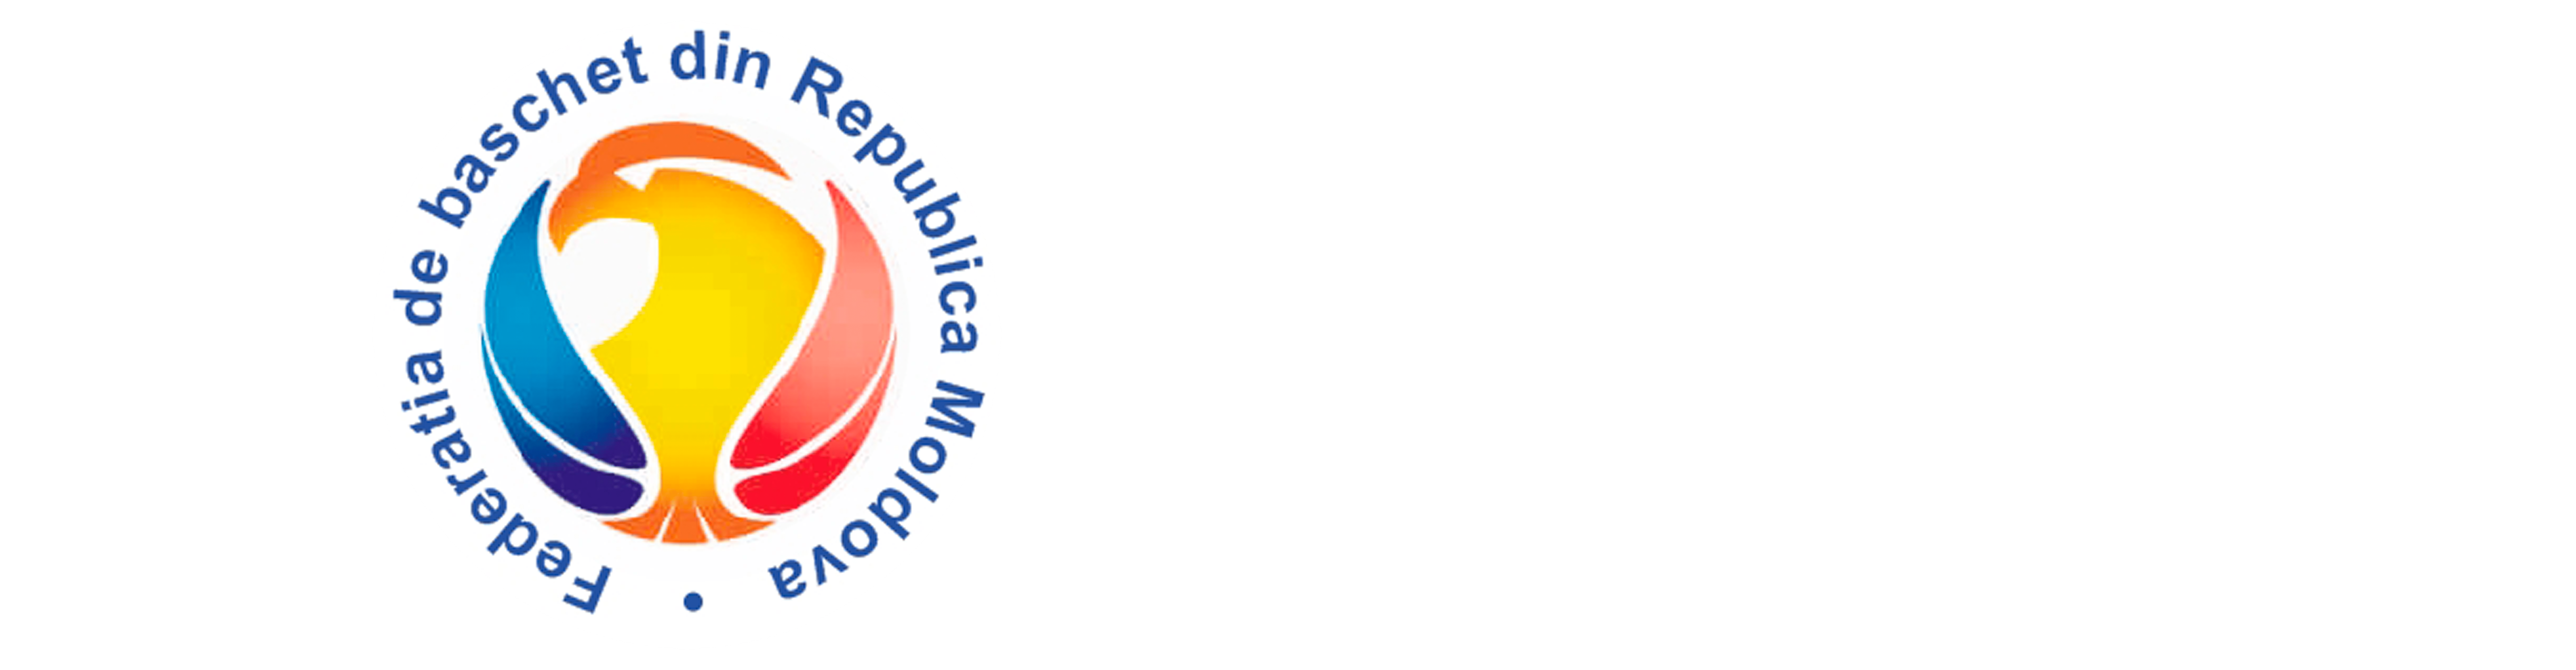 Official website of Basketball Federation of the Republic of Moldova